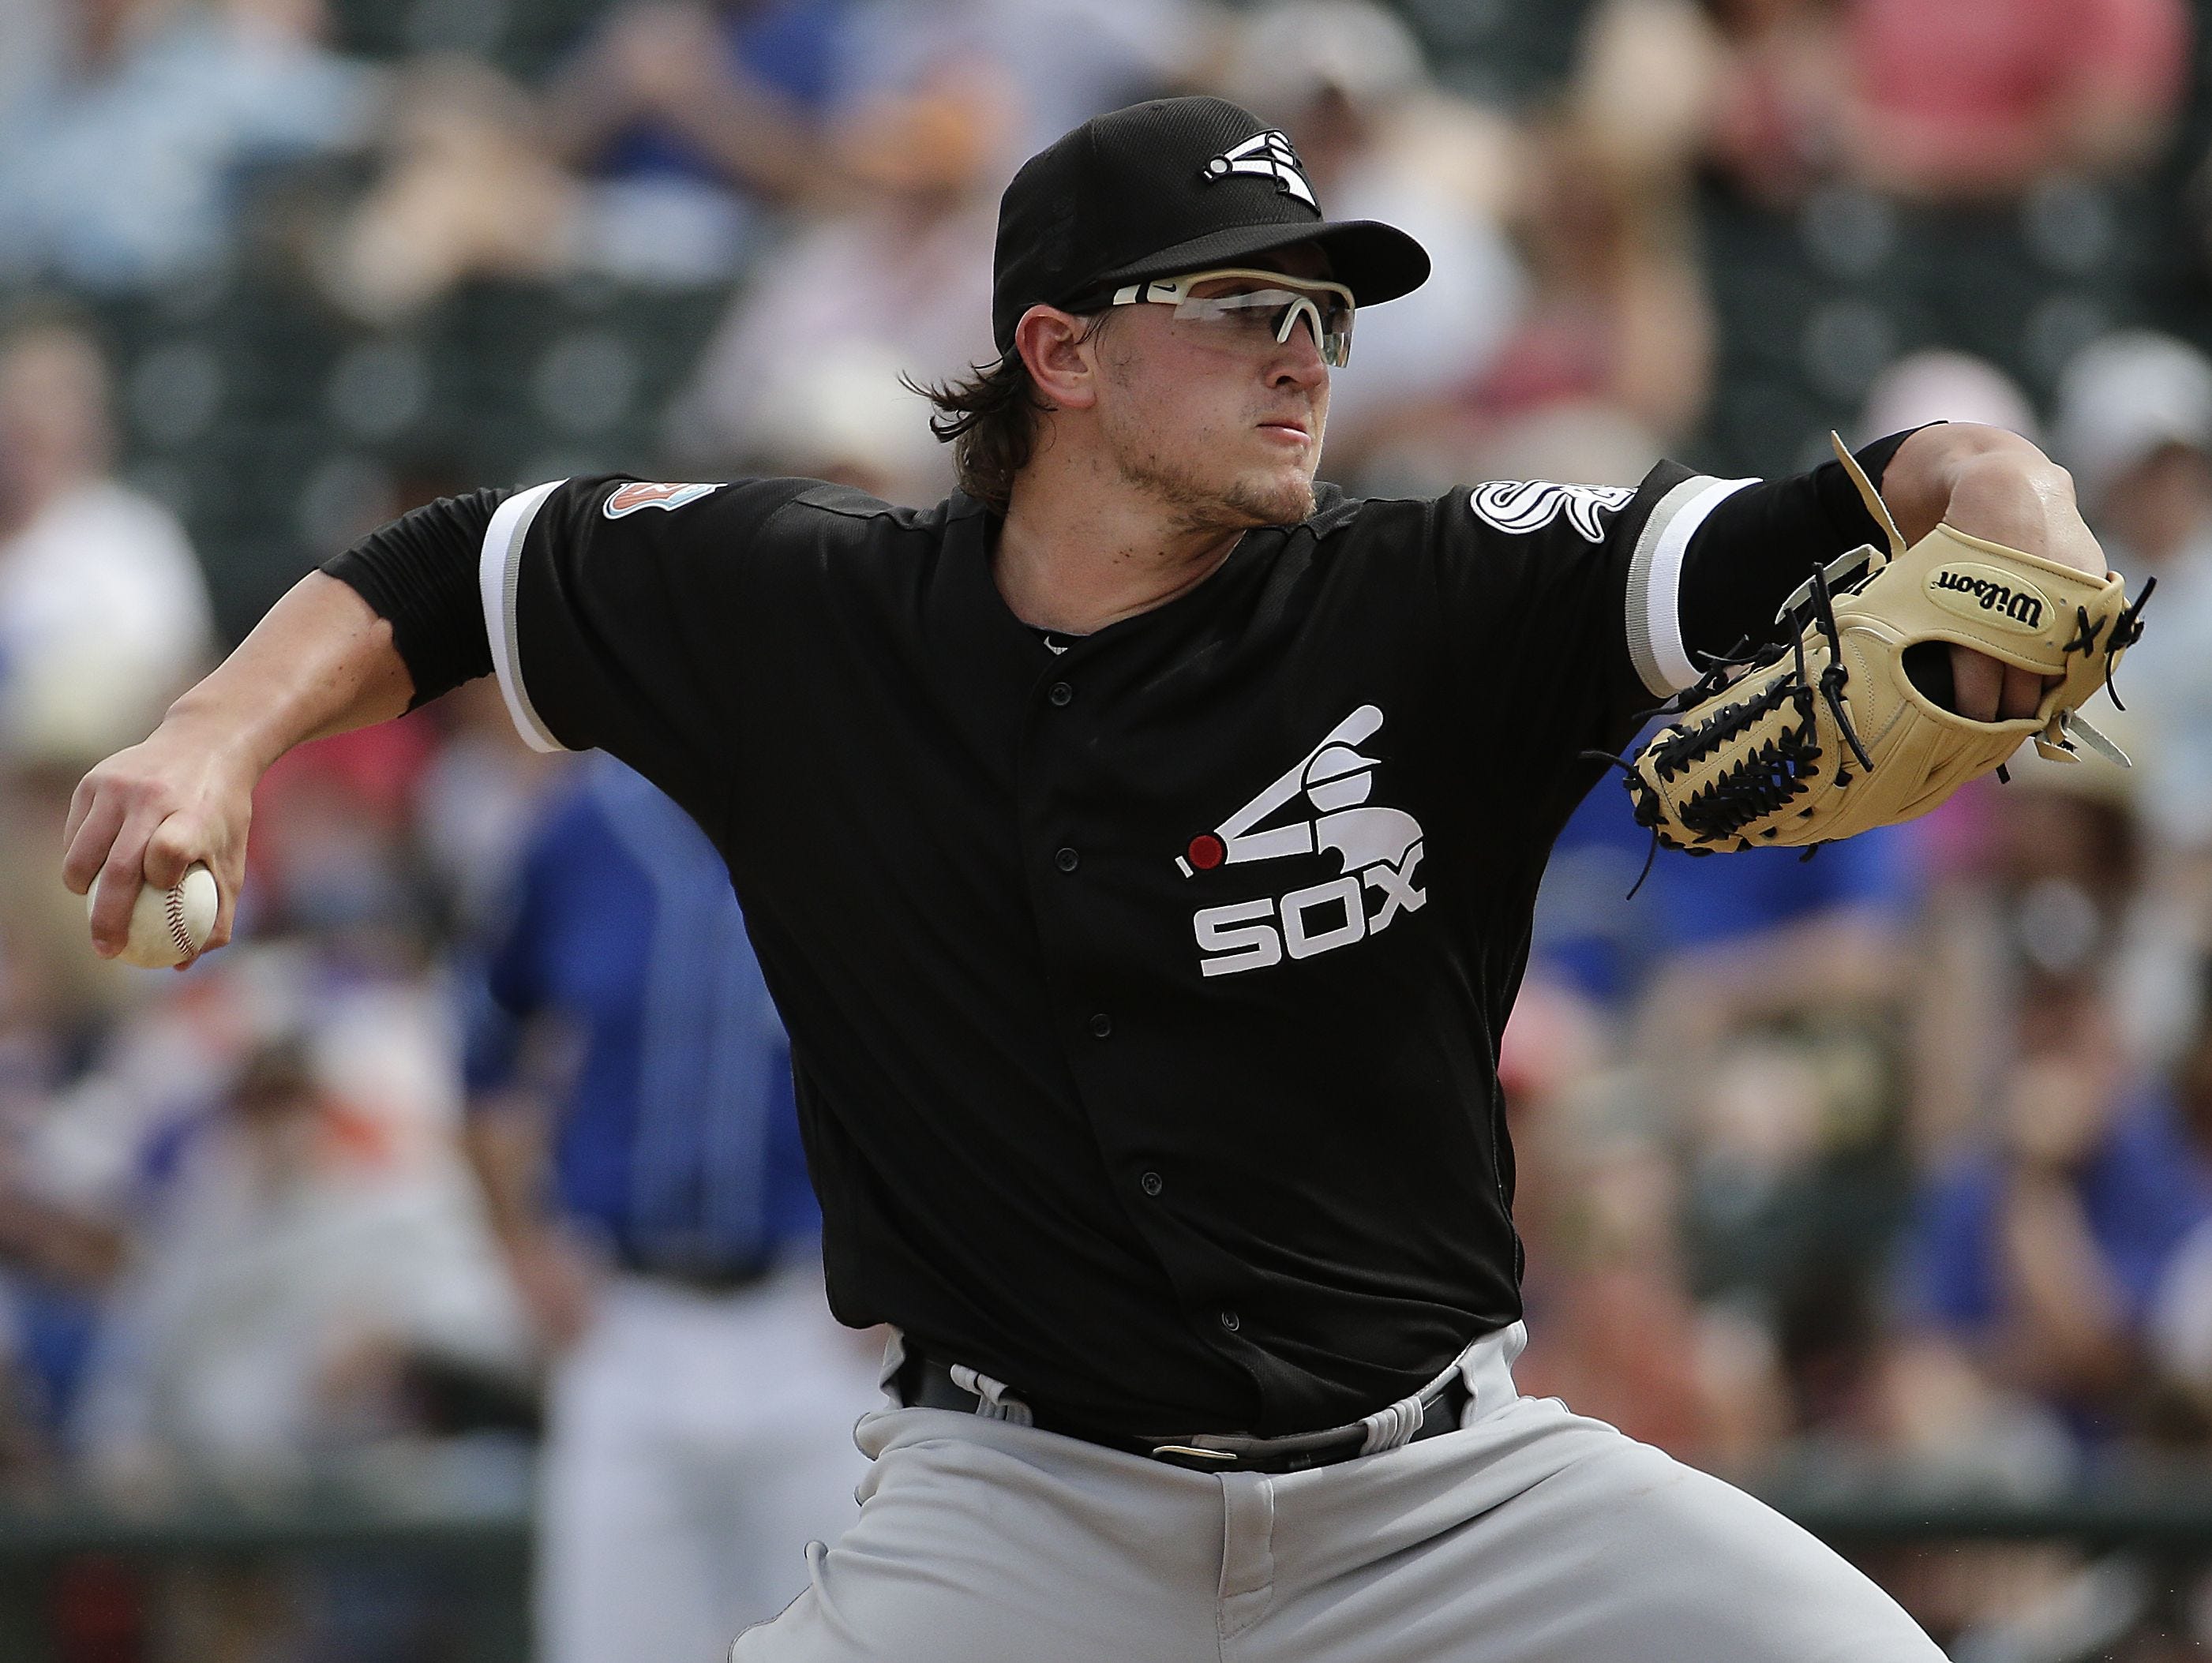 The Chicago White Sox's Carson Fulmer throws during the third inning of a spring training baseball game against the Kansas City Royals on March 5, 2016.